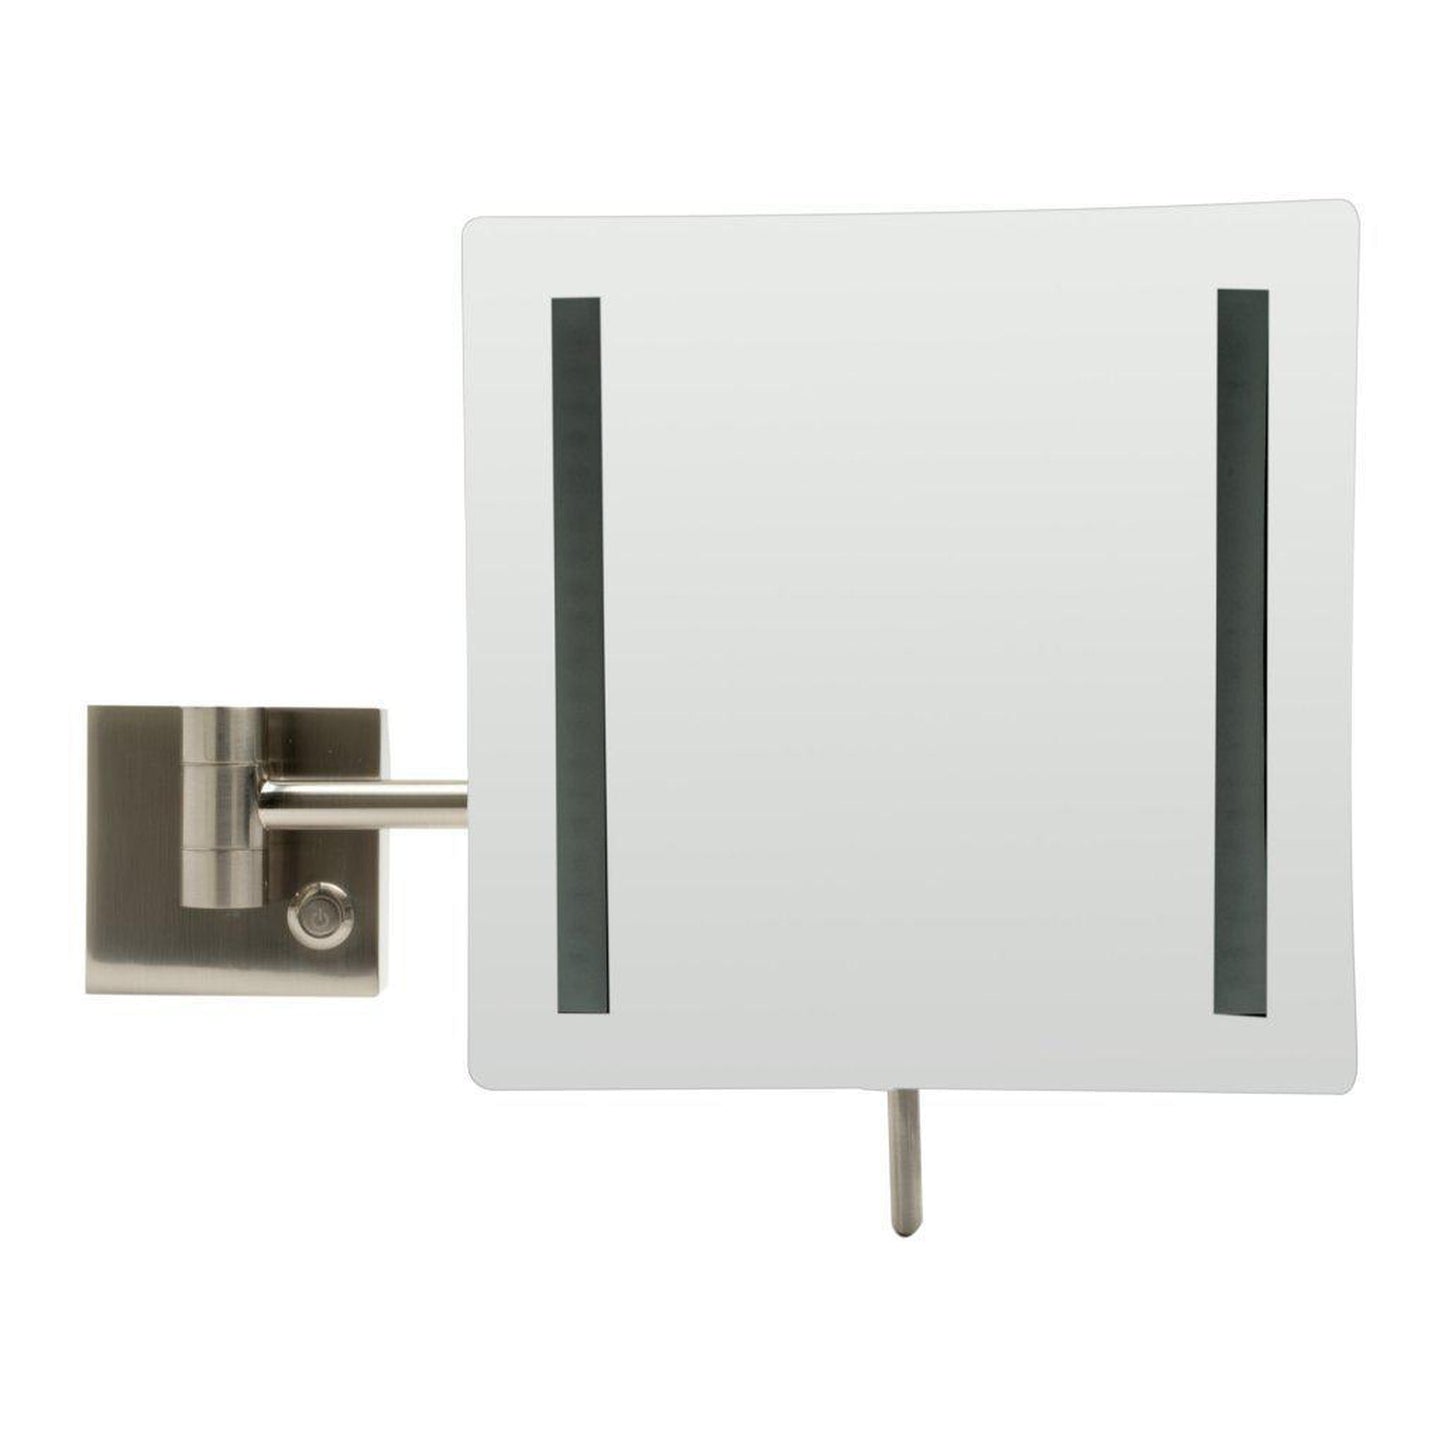 ALFI Brand ABM8WLED-BN 8" Brushed Nickel Wall-Mounted Square 5x Magnifying Cosmetic Mirror With Light